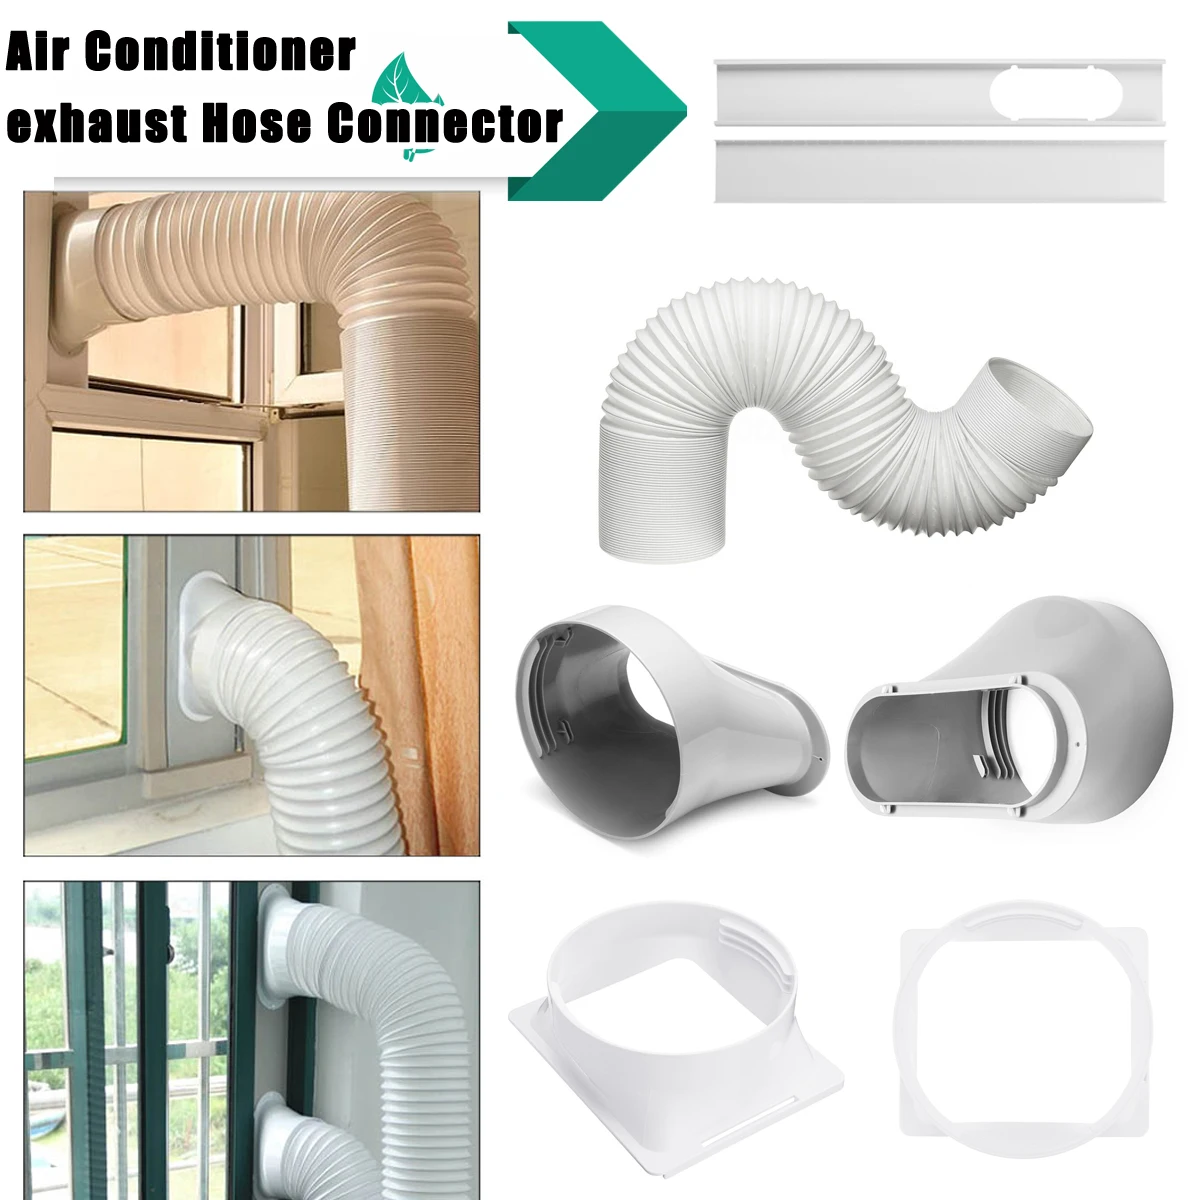 TOPAUP Window Slide Kit 2pcs 130cm Adjustable Plate Air Conditioner Wind Shield Exhaust Hose Connector for Portable Air Conditioner 